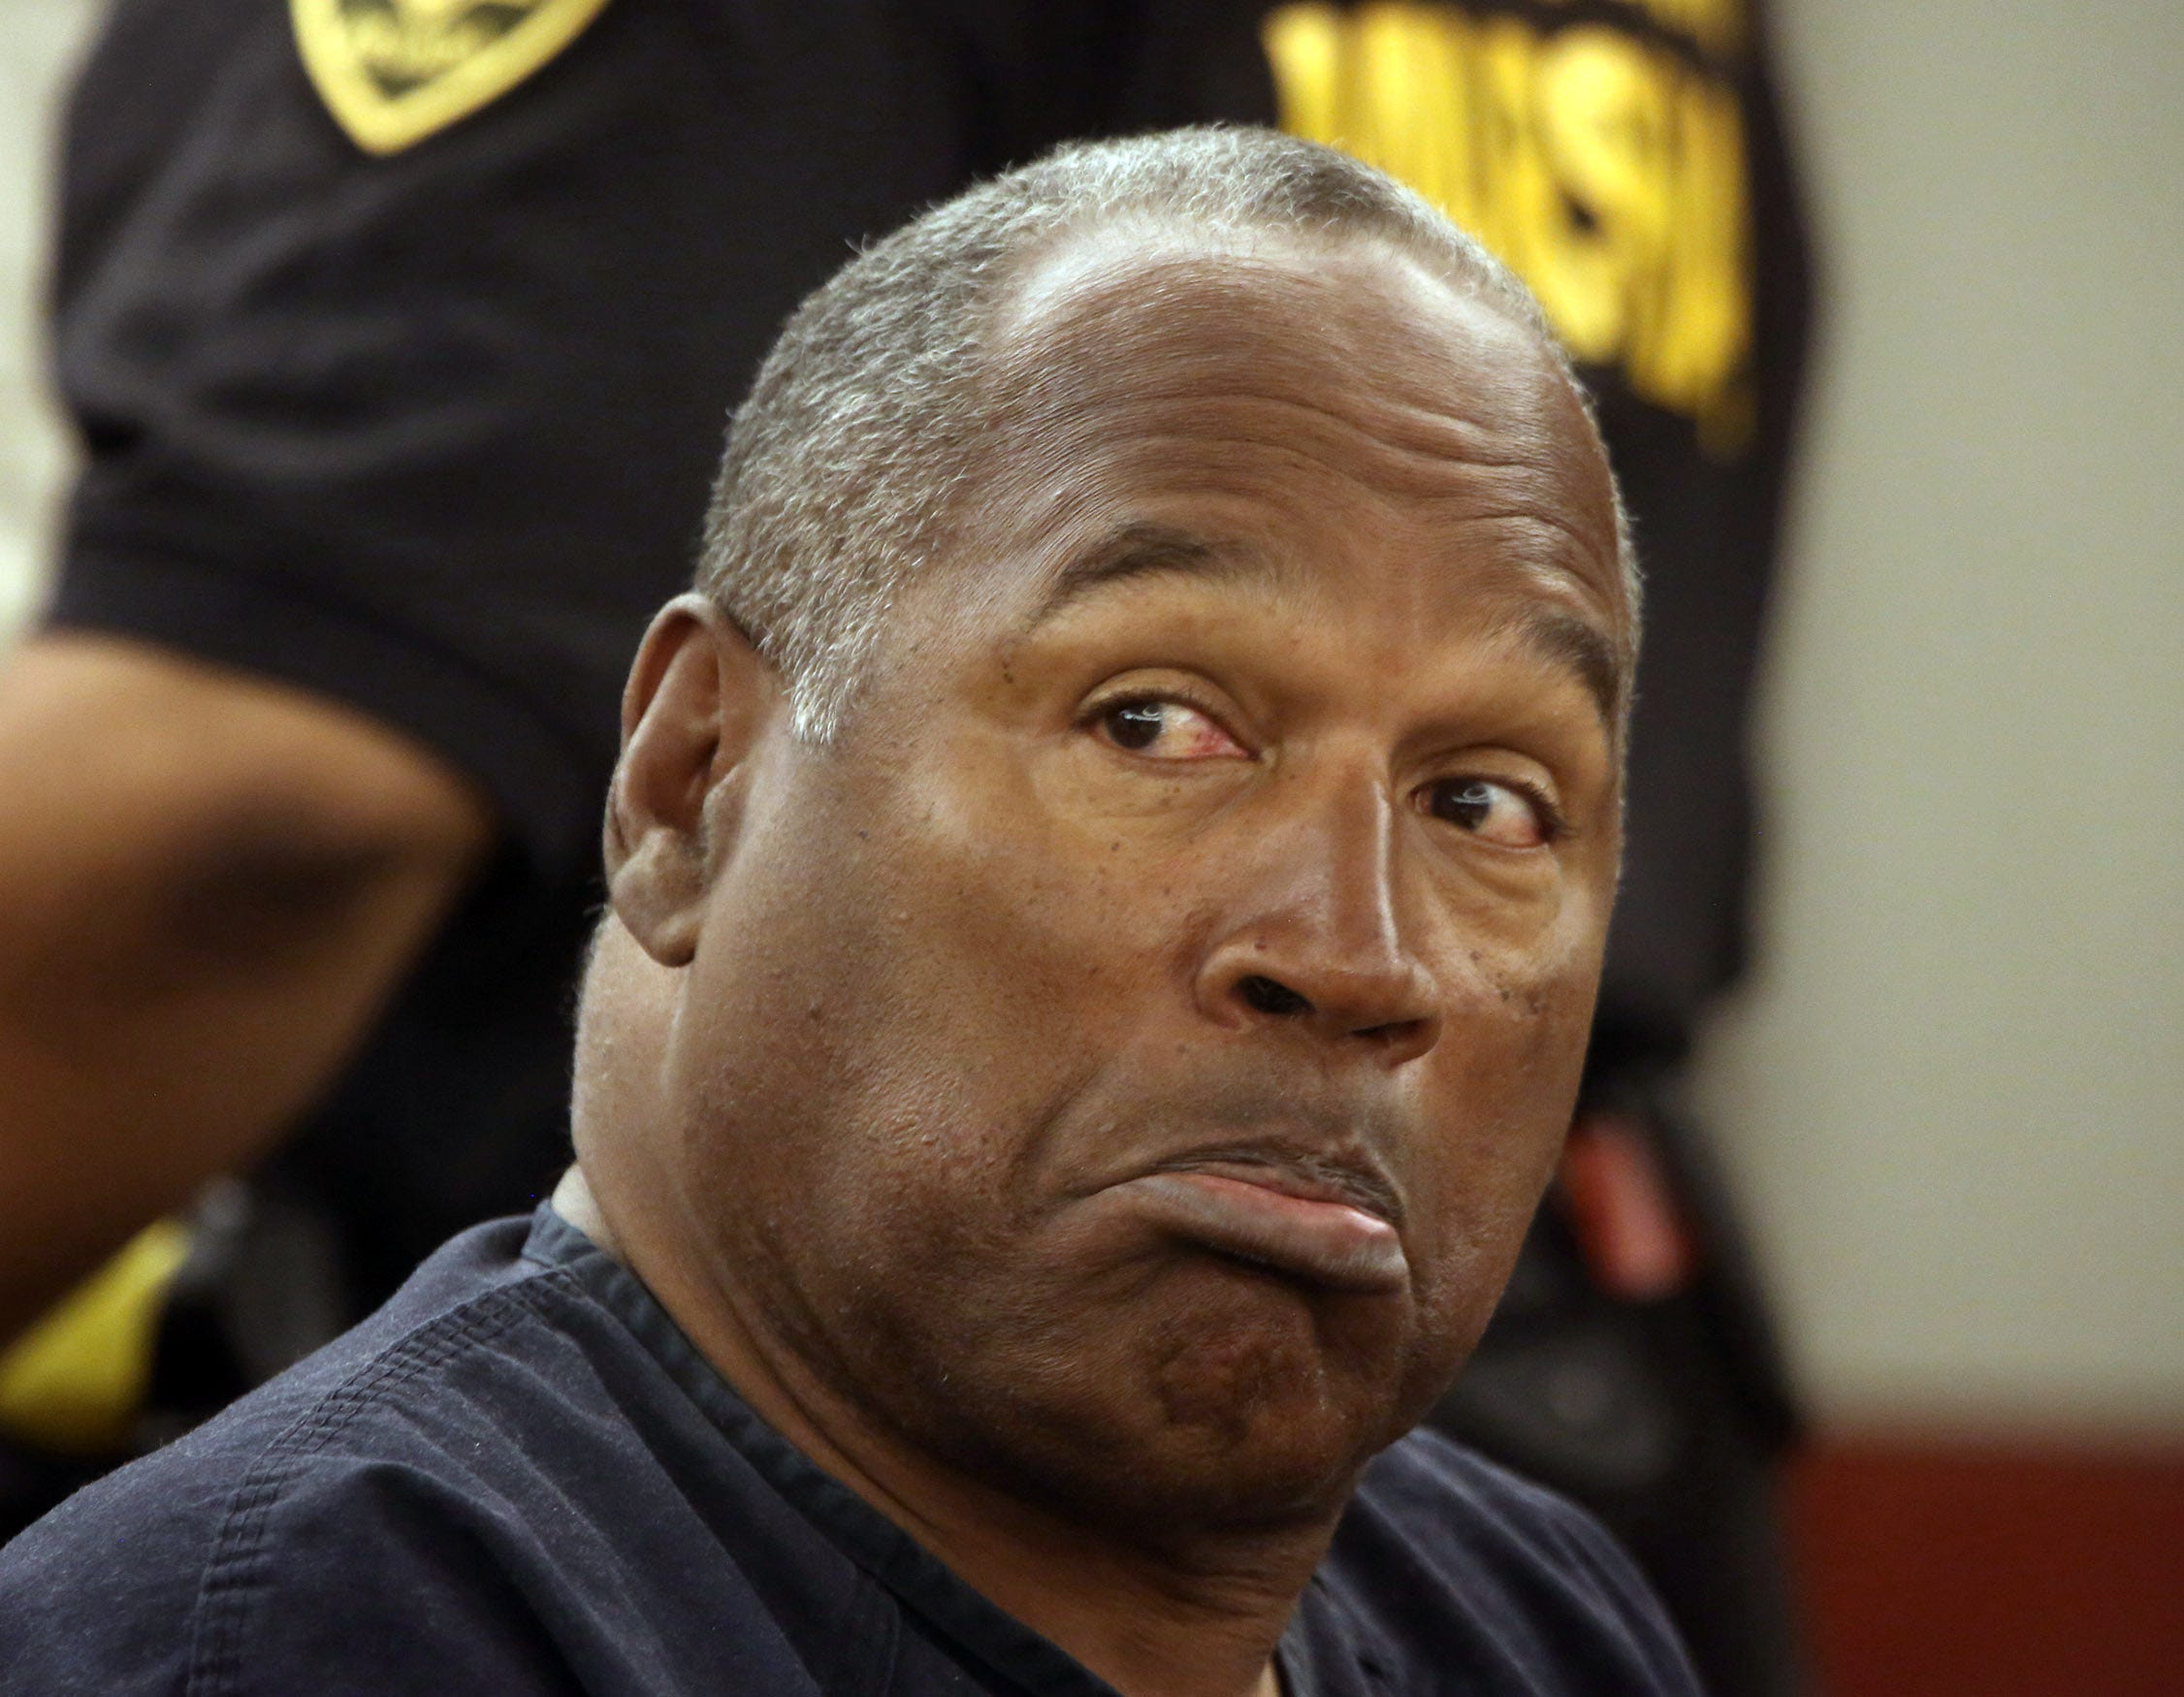 Attorney for Ron Goldman's family has question he wants asked of O.J. Simpson during parole hearing